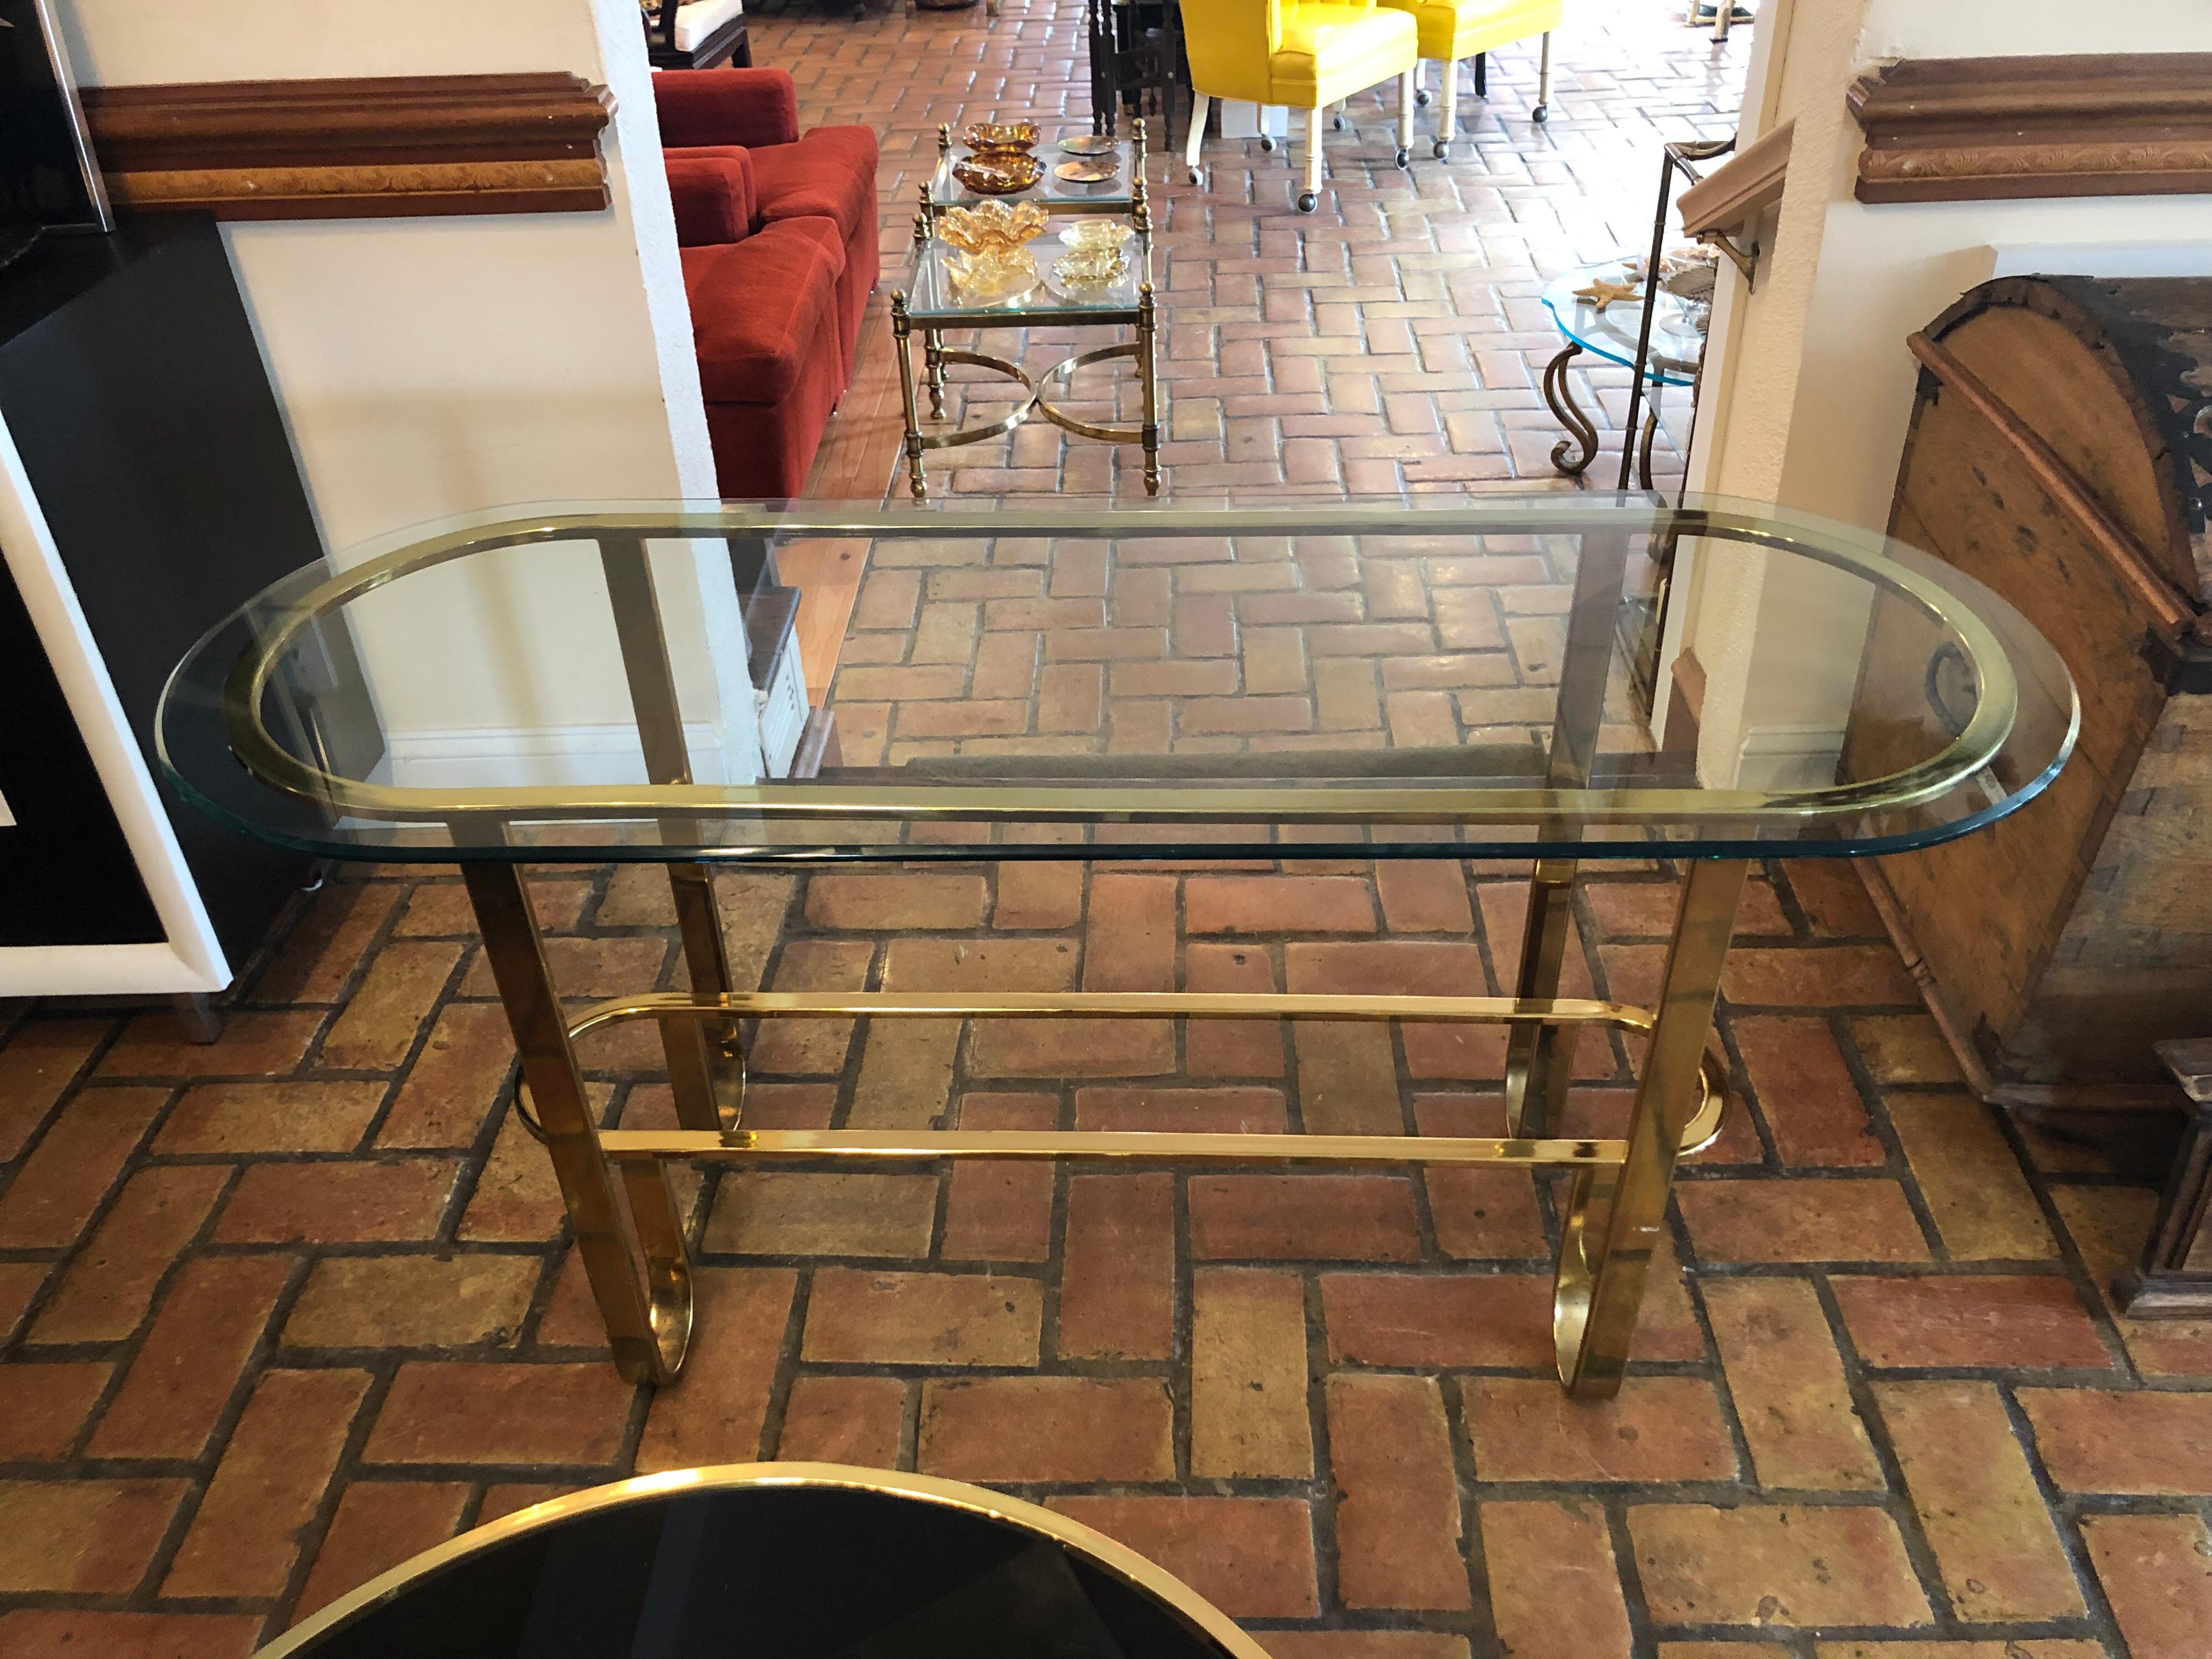 Hollywood Regency brass and glass console table. Nice, Minimalist racetrack design. Glass top is loose so not recommended for homes with children. Polished, electroplated brass. Designed by Milo Baughman for by Design Institute of America.